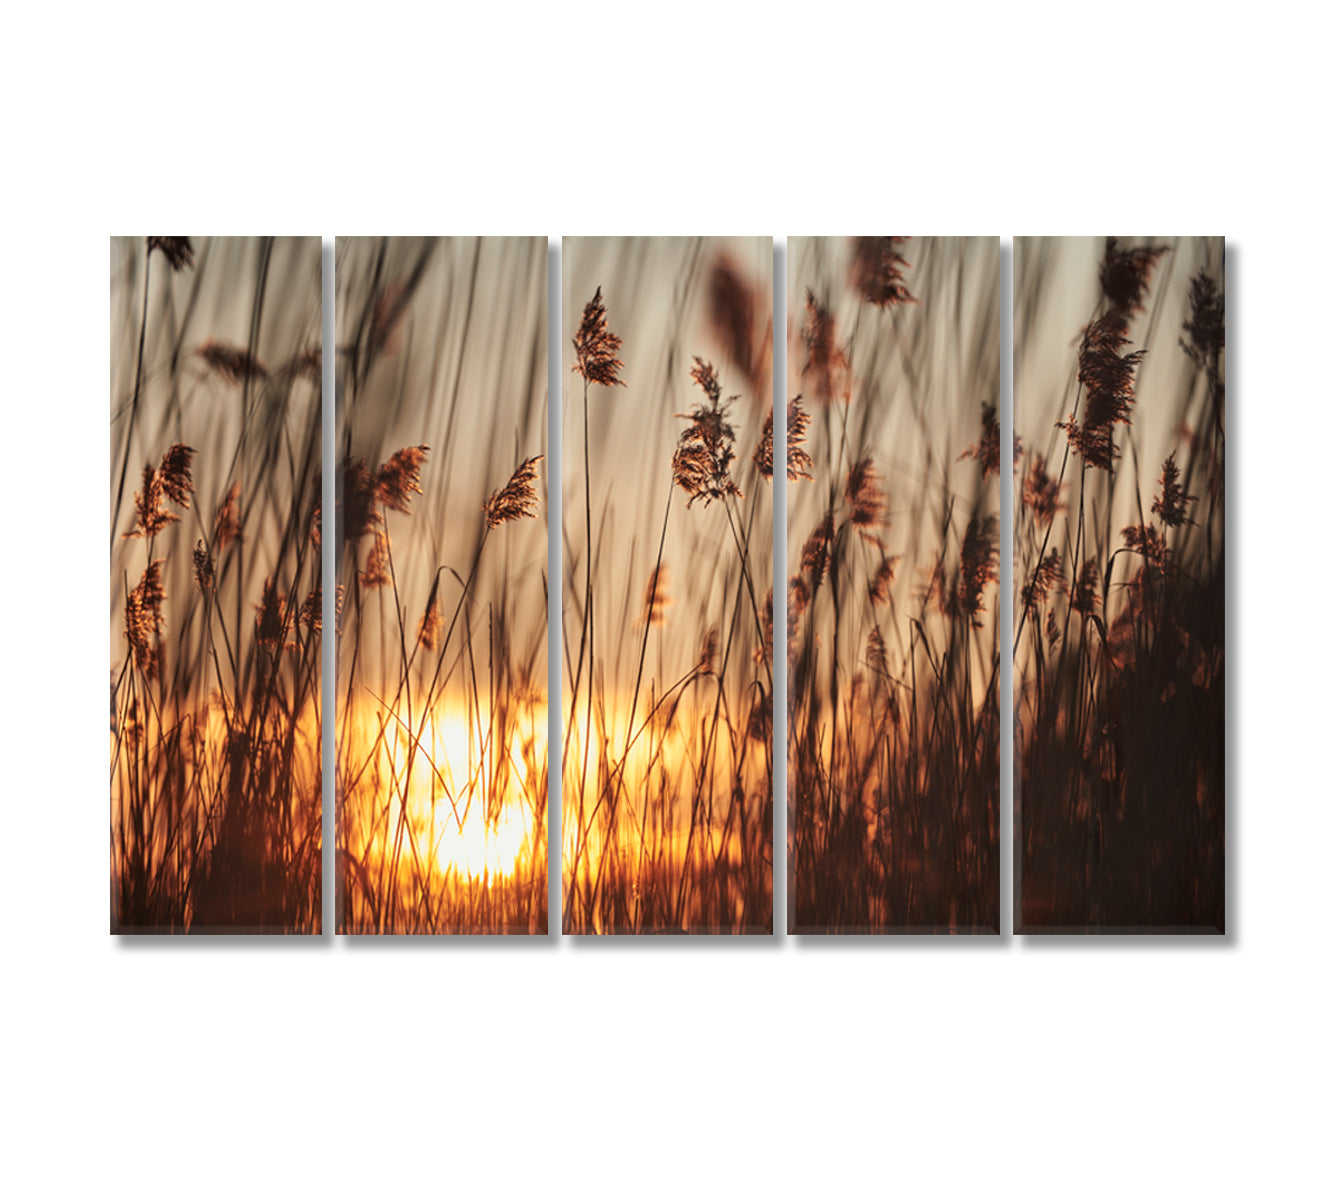 Reeds in Rays of Sun Canvas Print-Canvas Print-CetArt-5 Panels-36x24 inches-CetArt